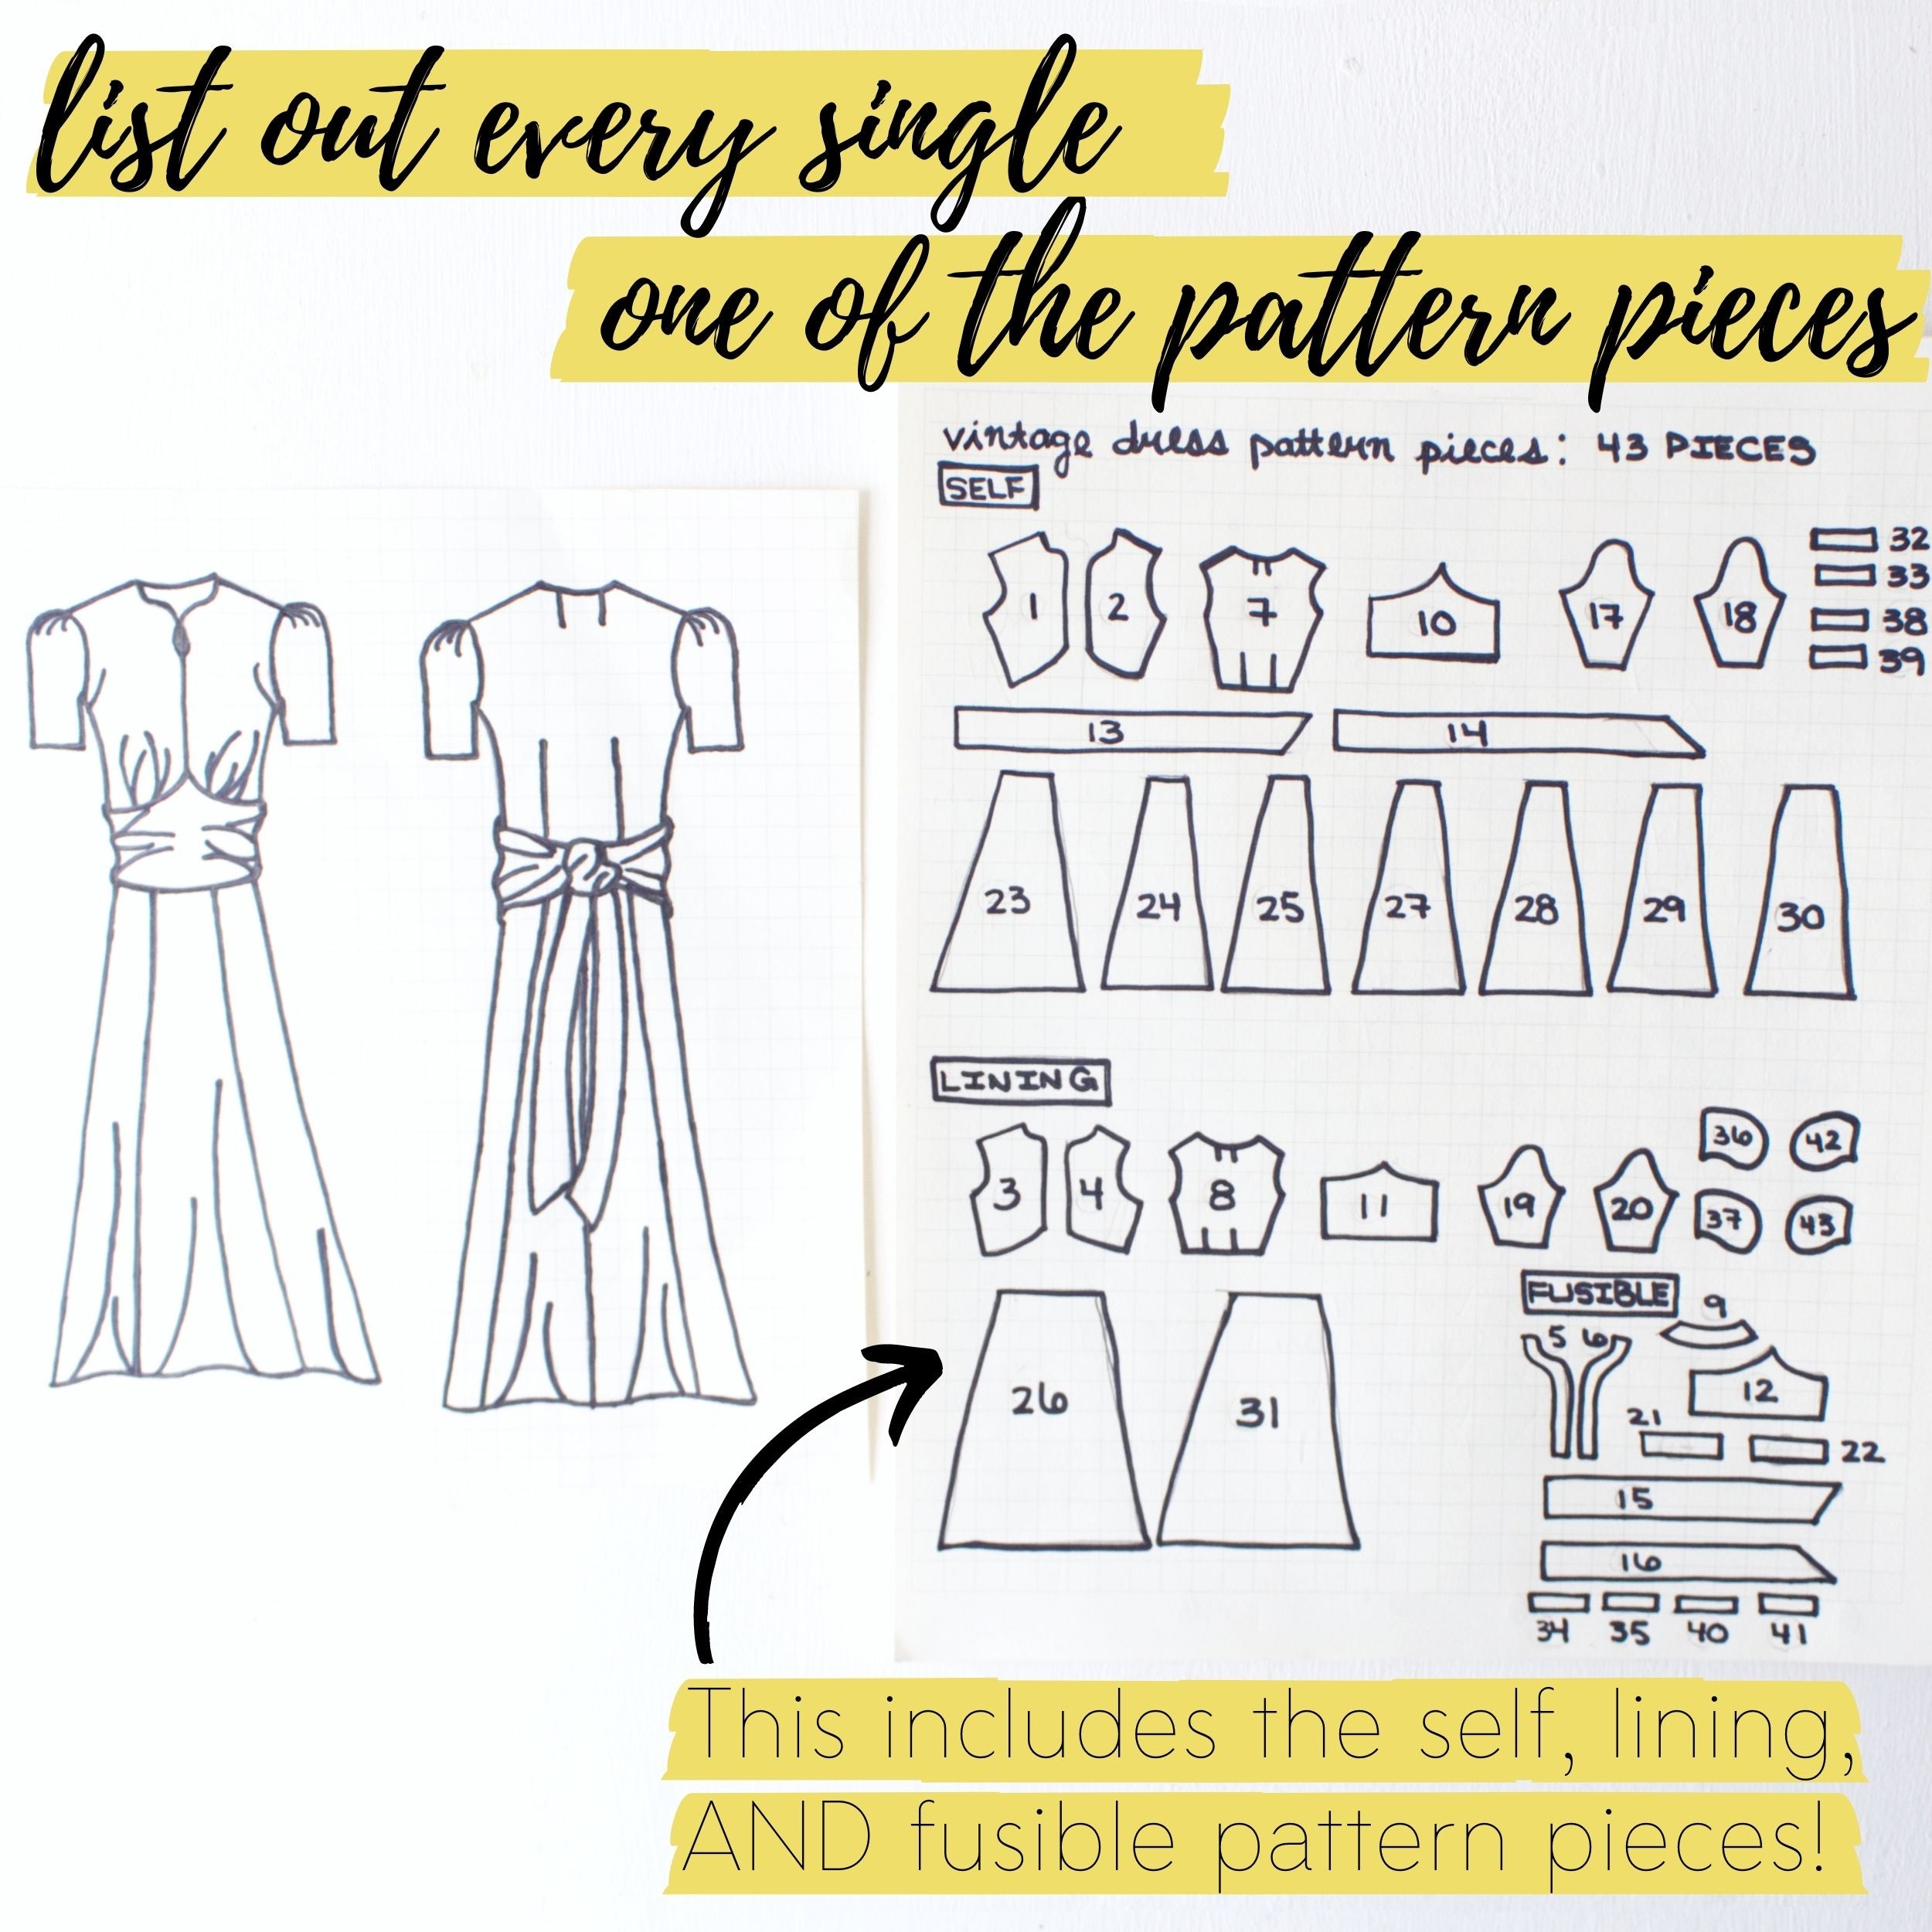 How to bring a vintage sewing pattern to life: List out the pieces